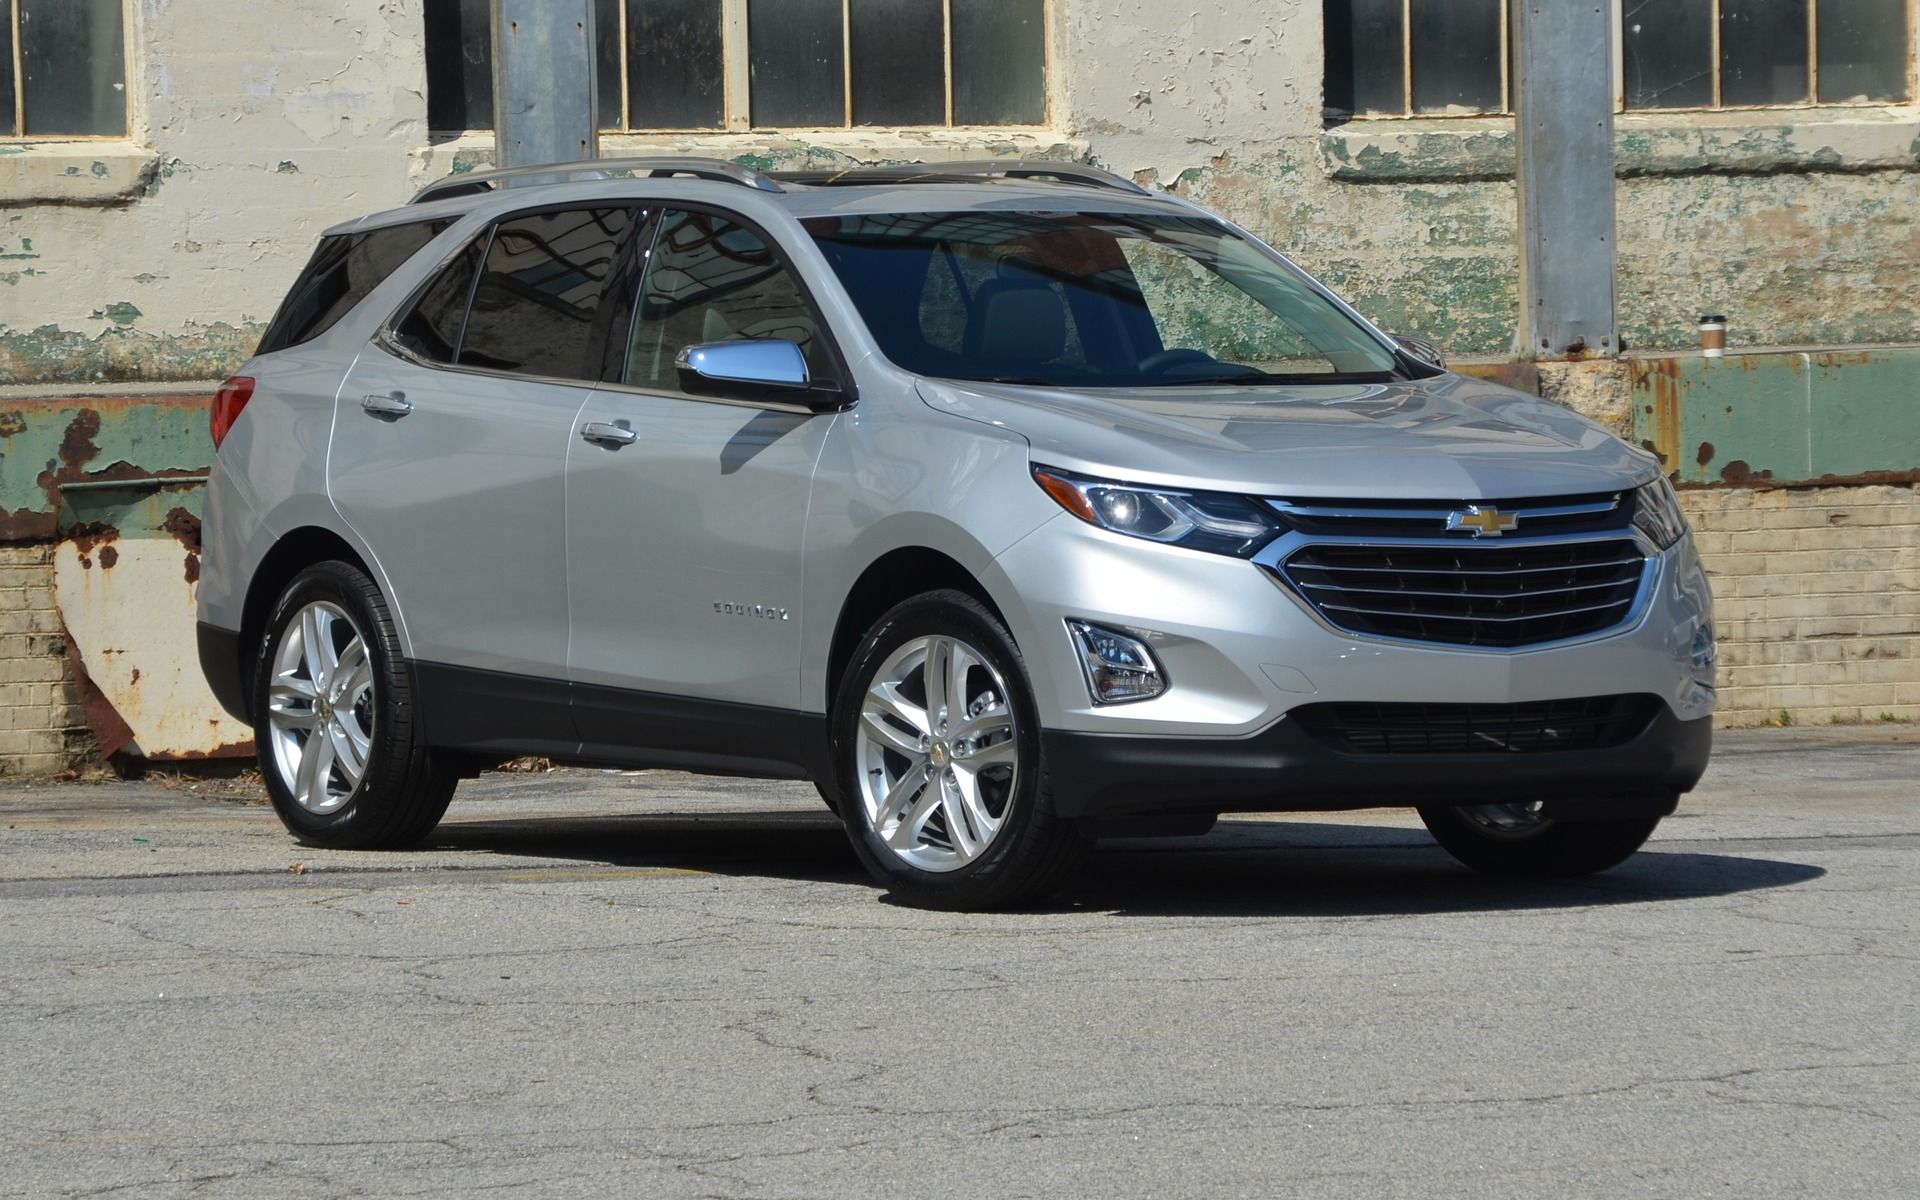 Chevrolet Equinox parked outside